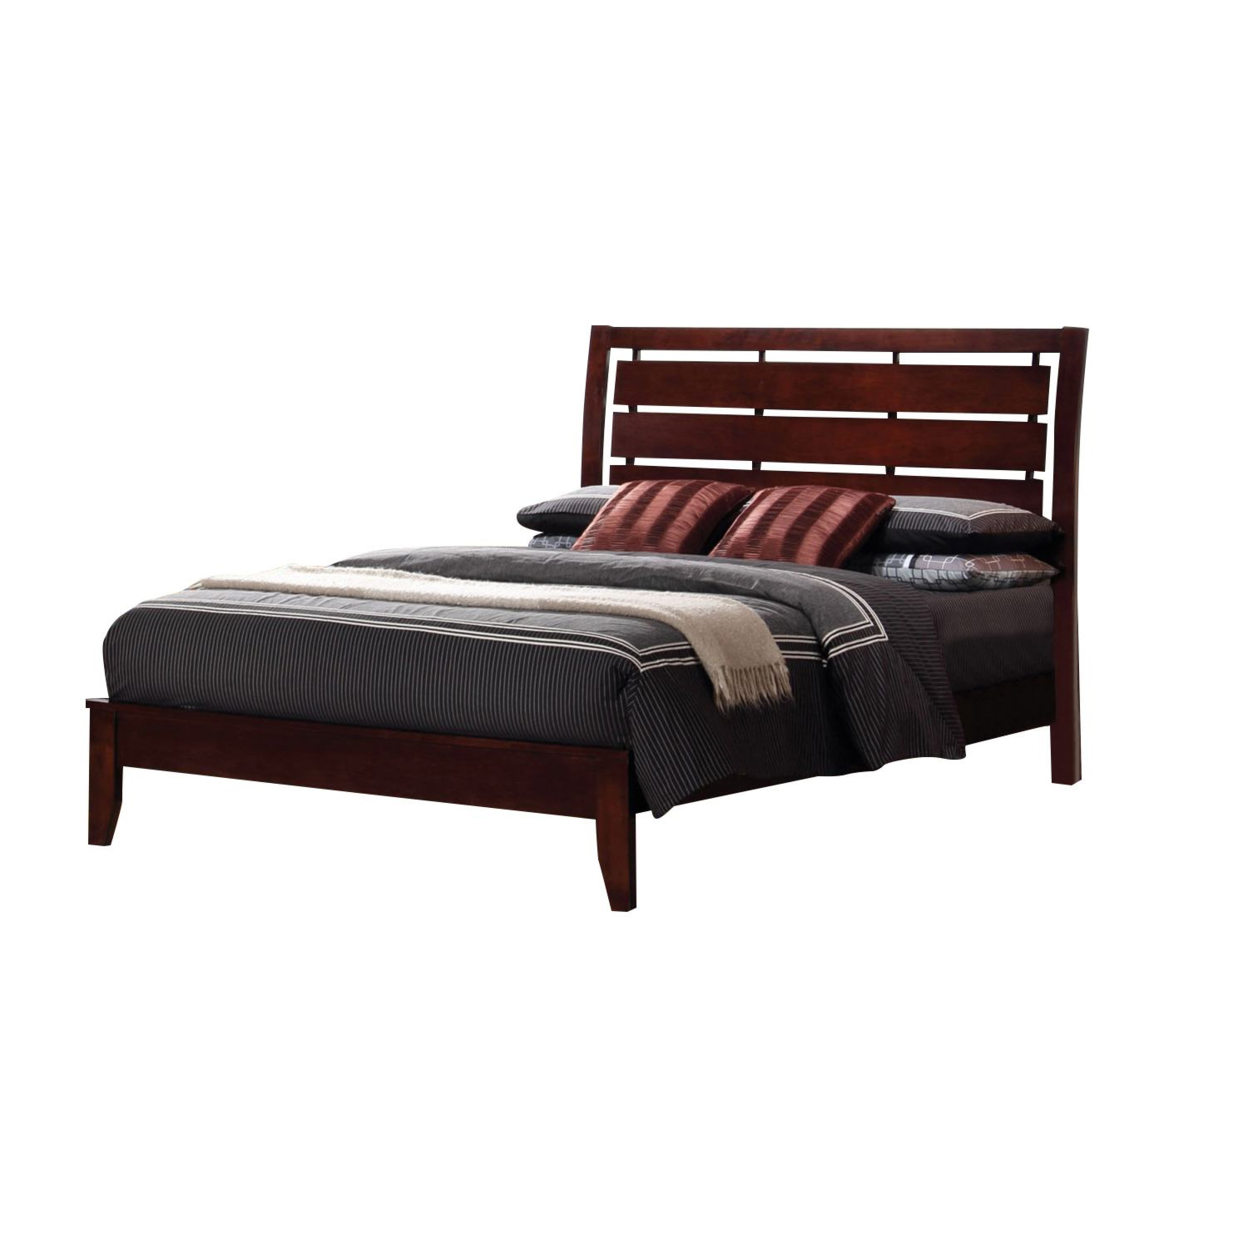 Transitional Wooden Queen Size Bed With Slatted Style Headboard, Brown- Saltoro Sherpi